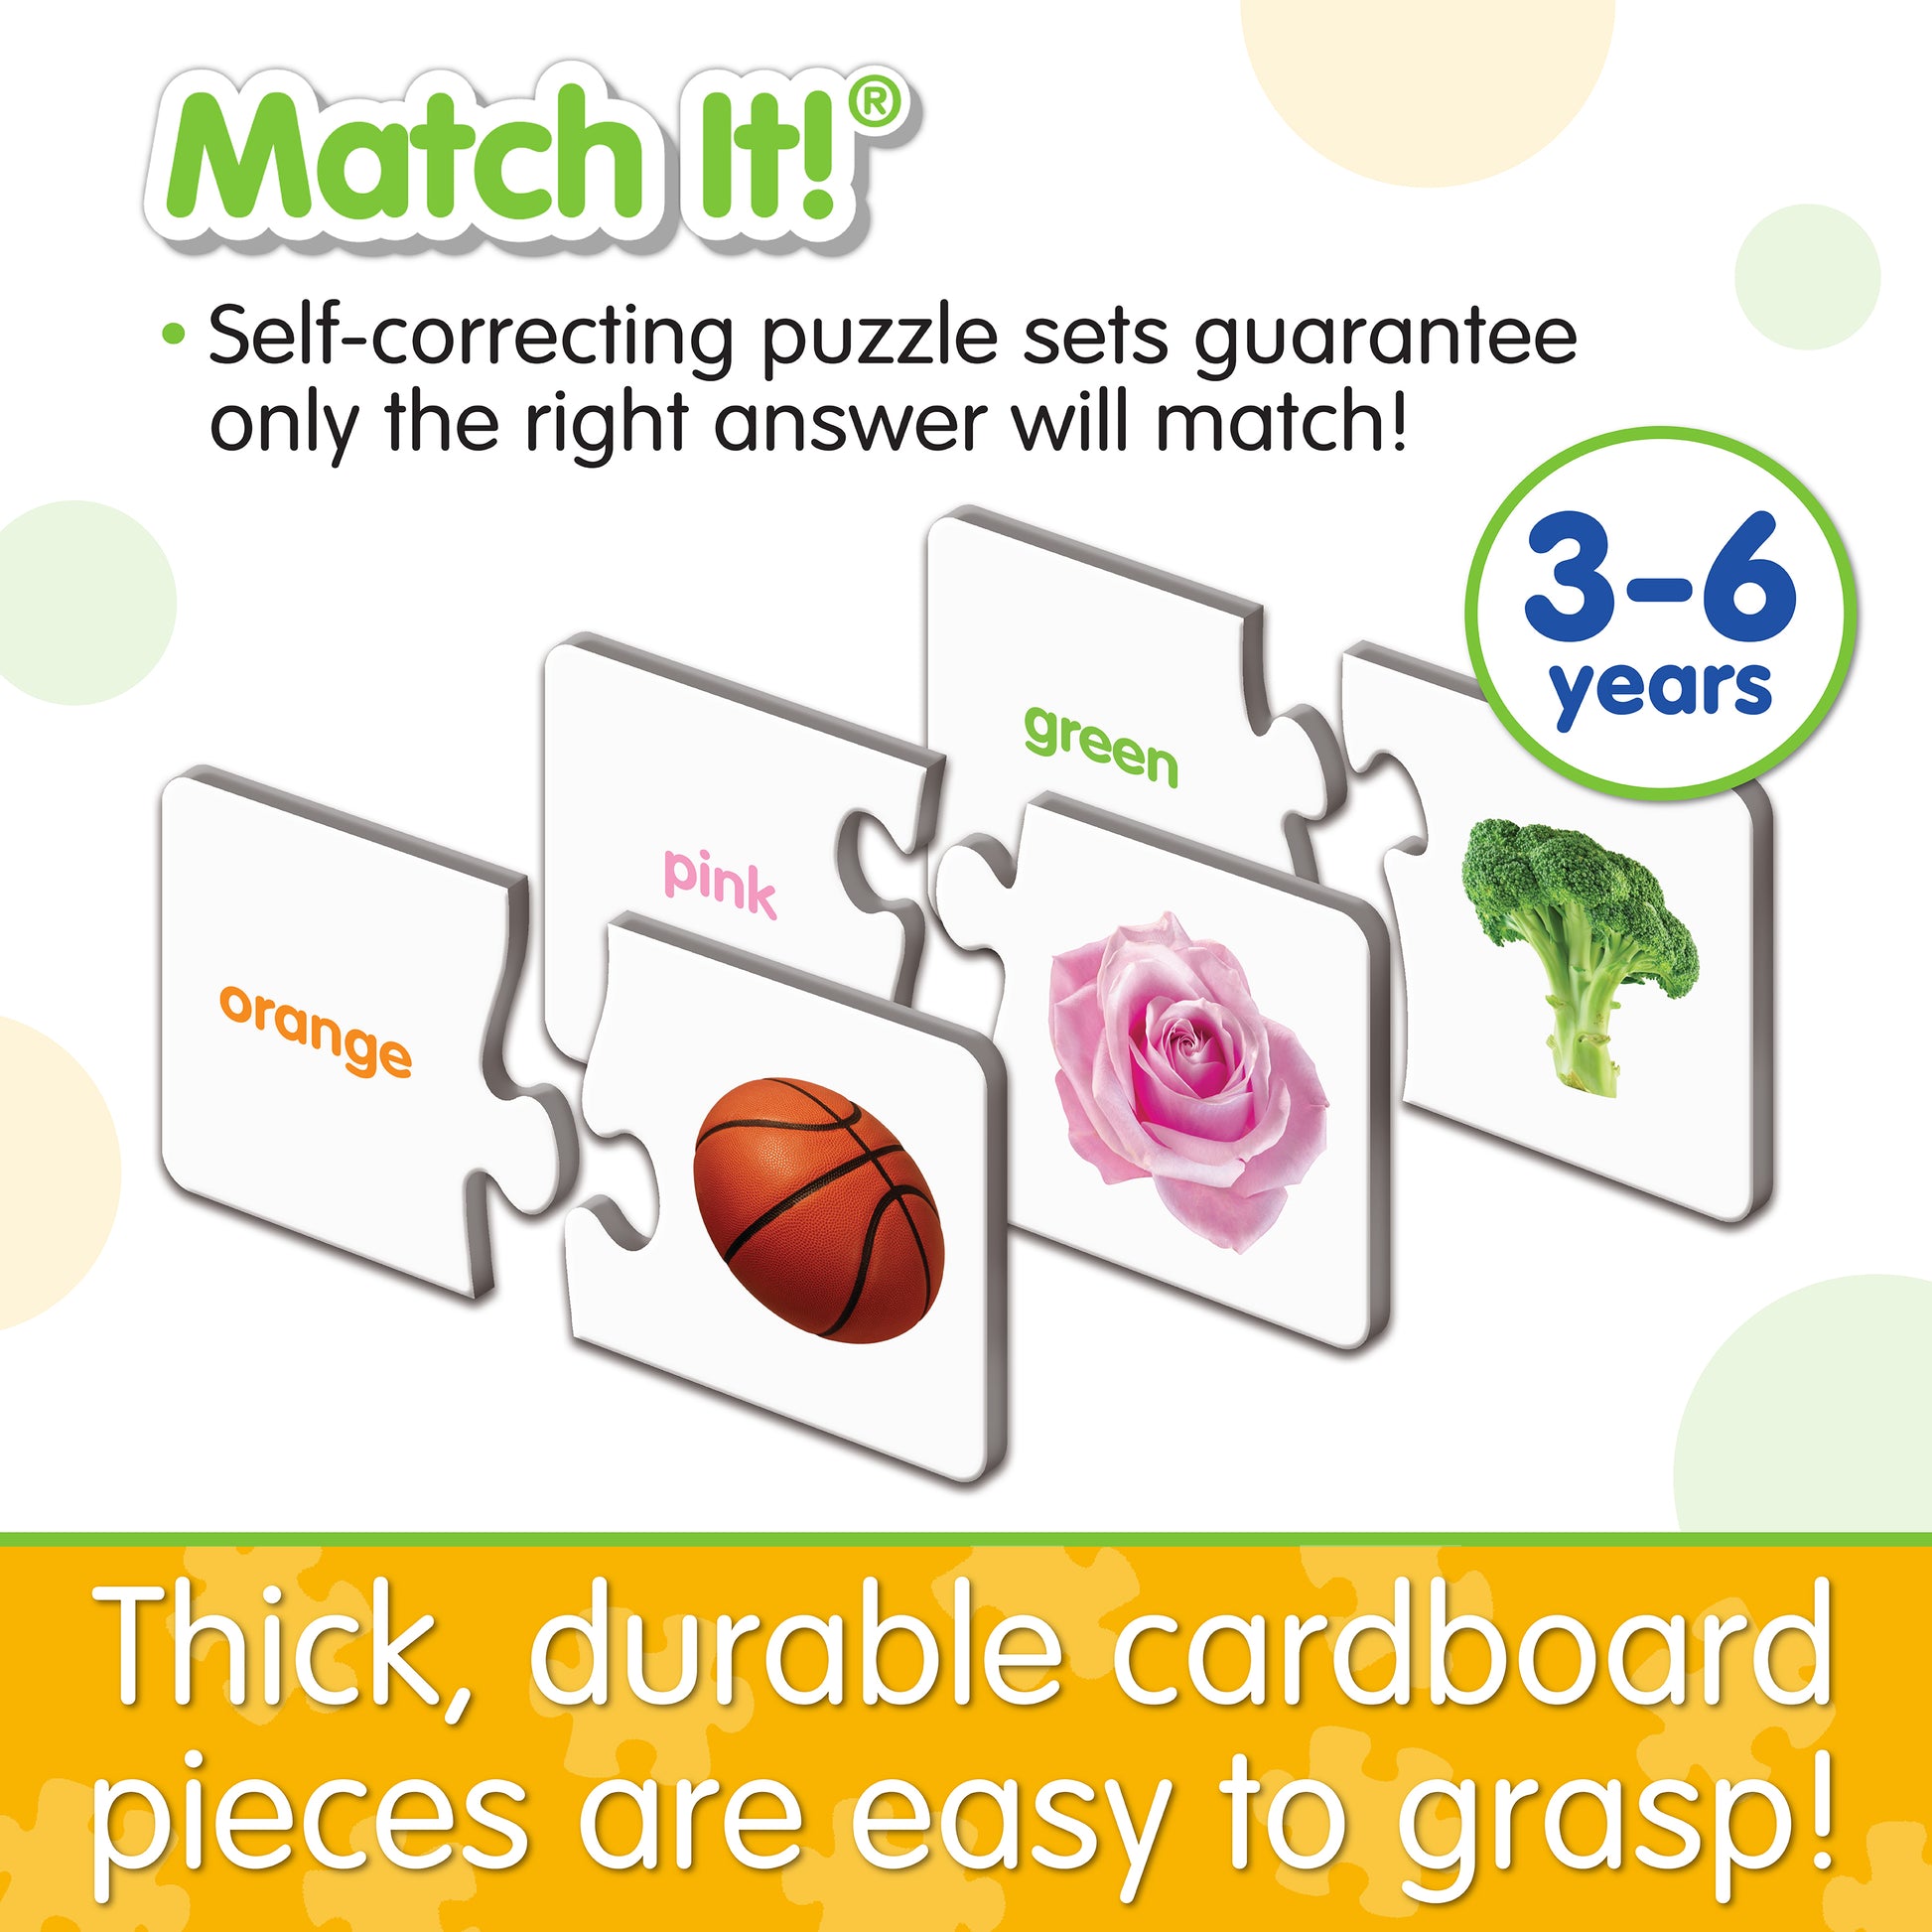 Infographic about Match It - Colors' features that says, "Thick, durable cardboard pieces are easy to grasp!"